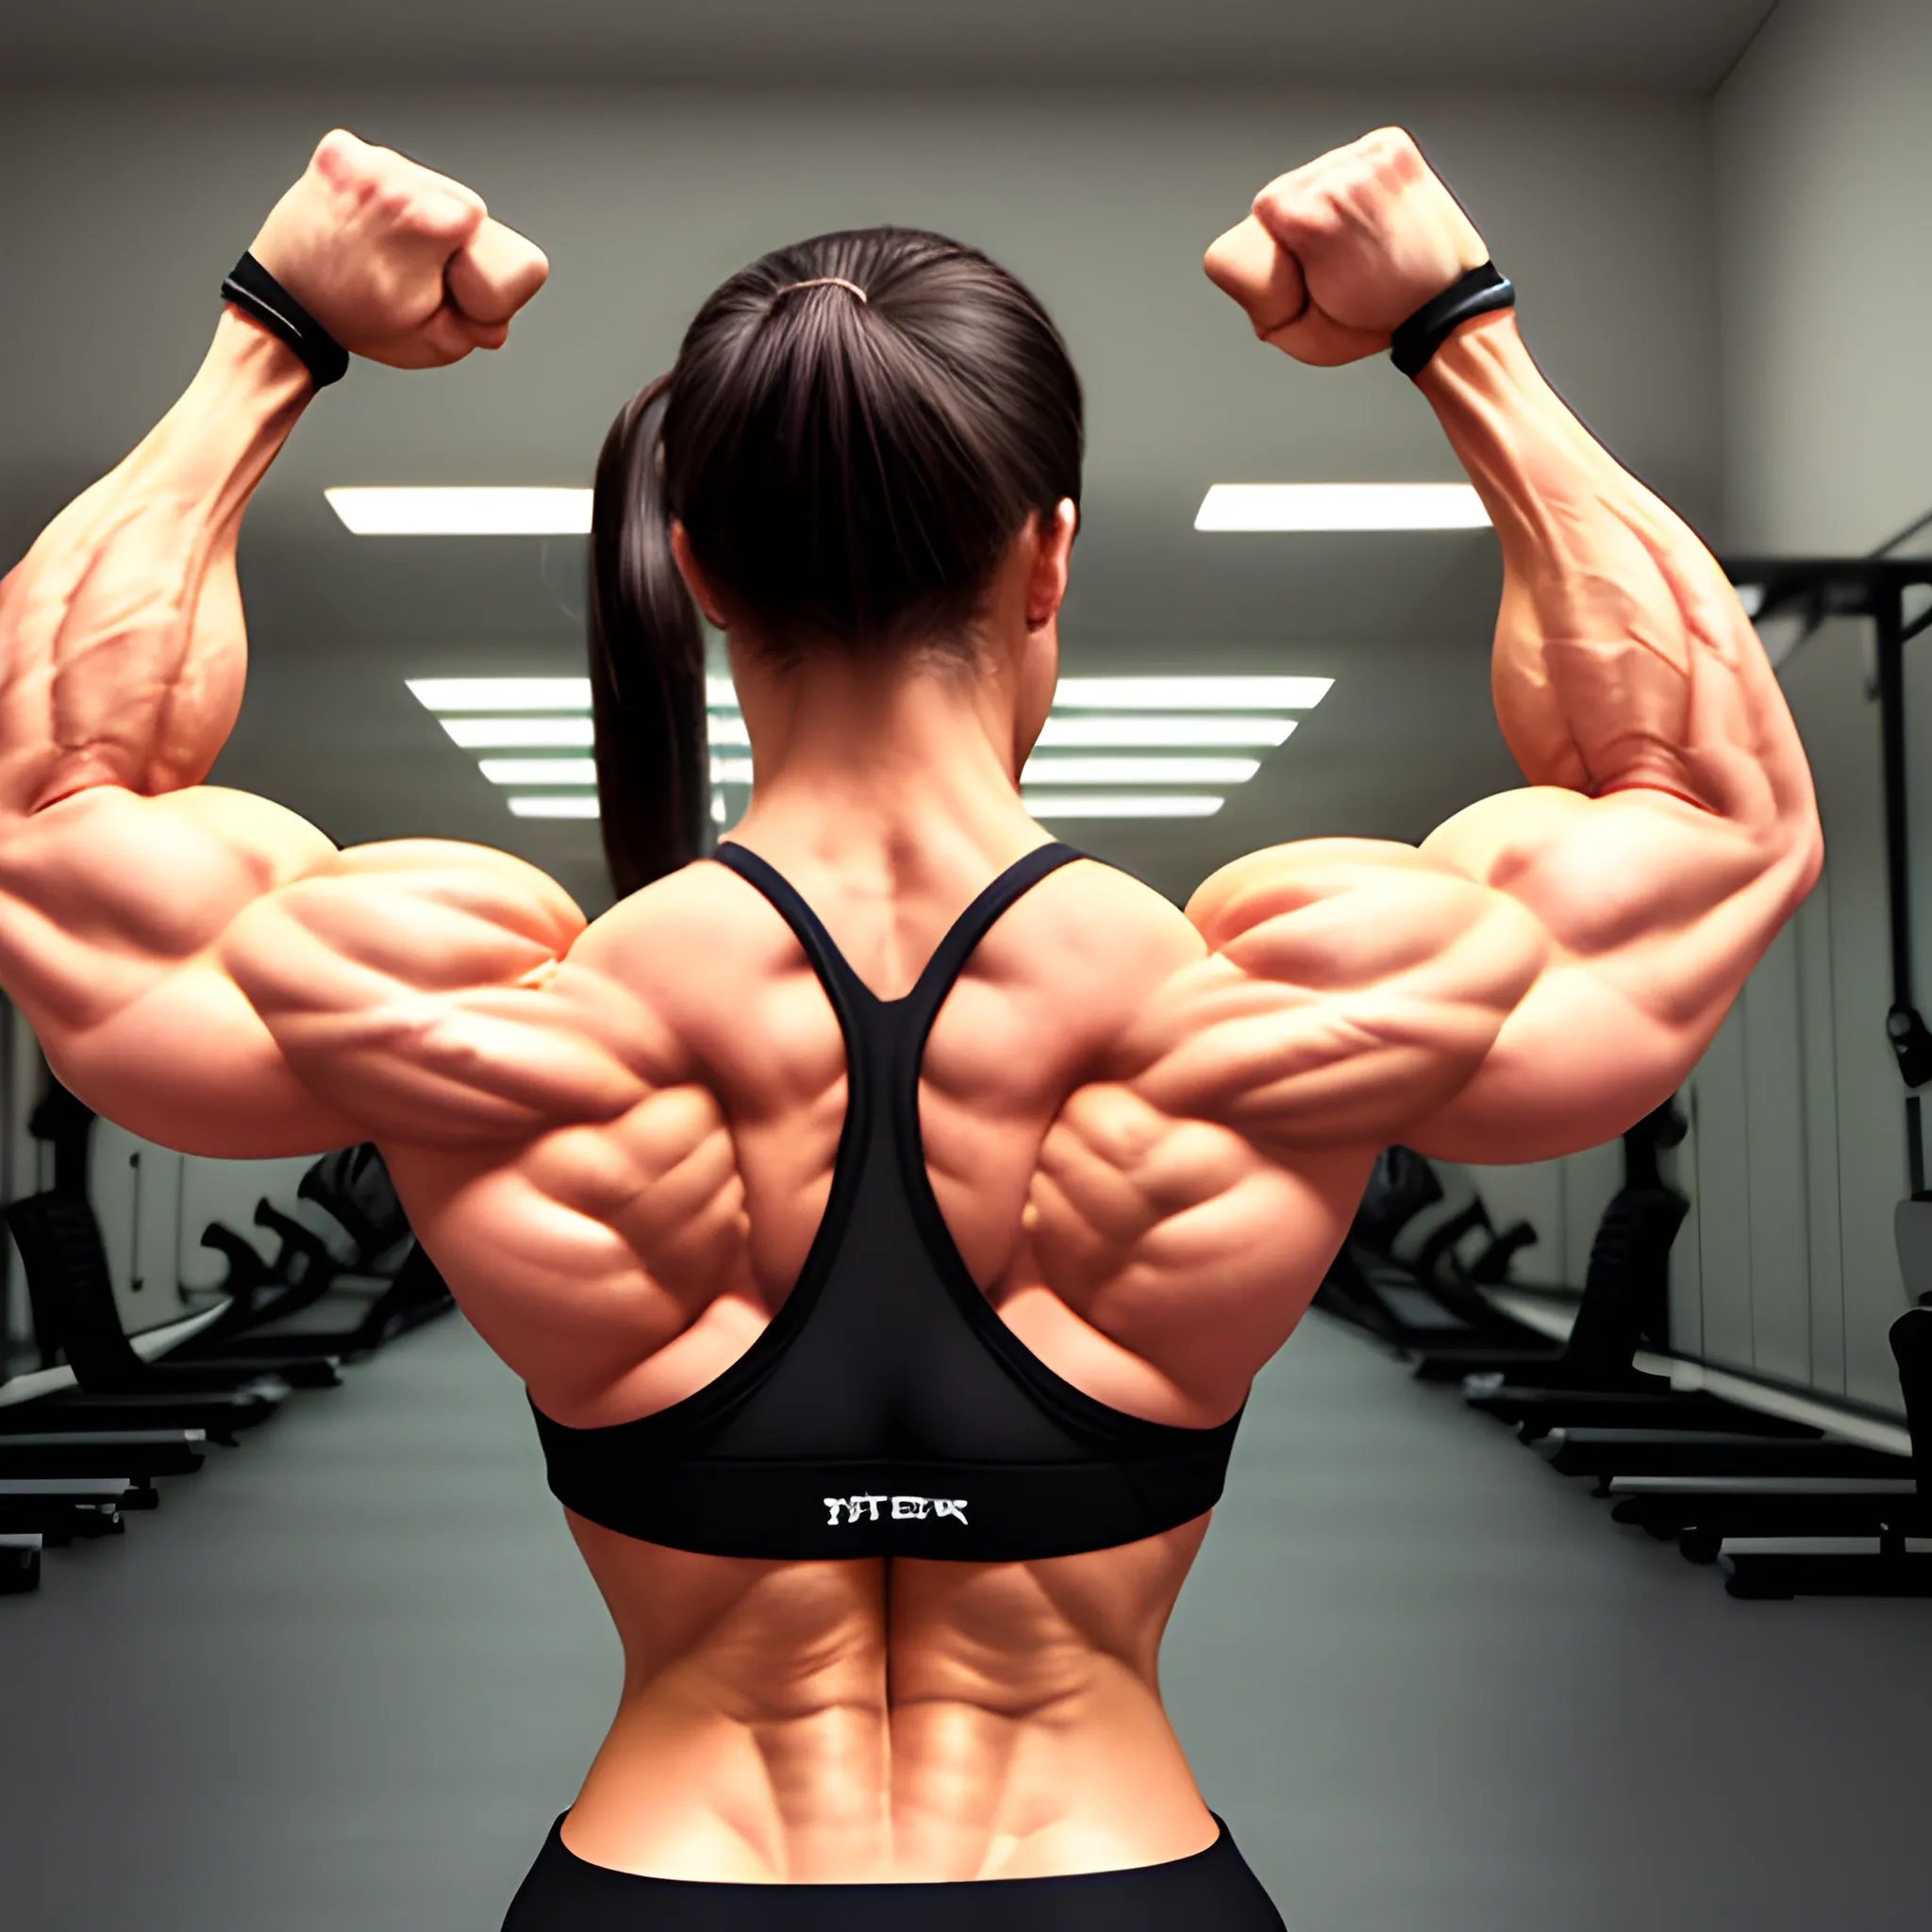 hyper-fit woman, above average musculature, very wide back, larg